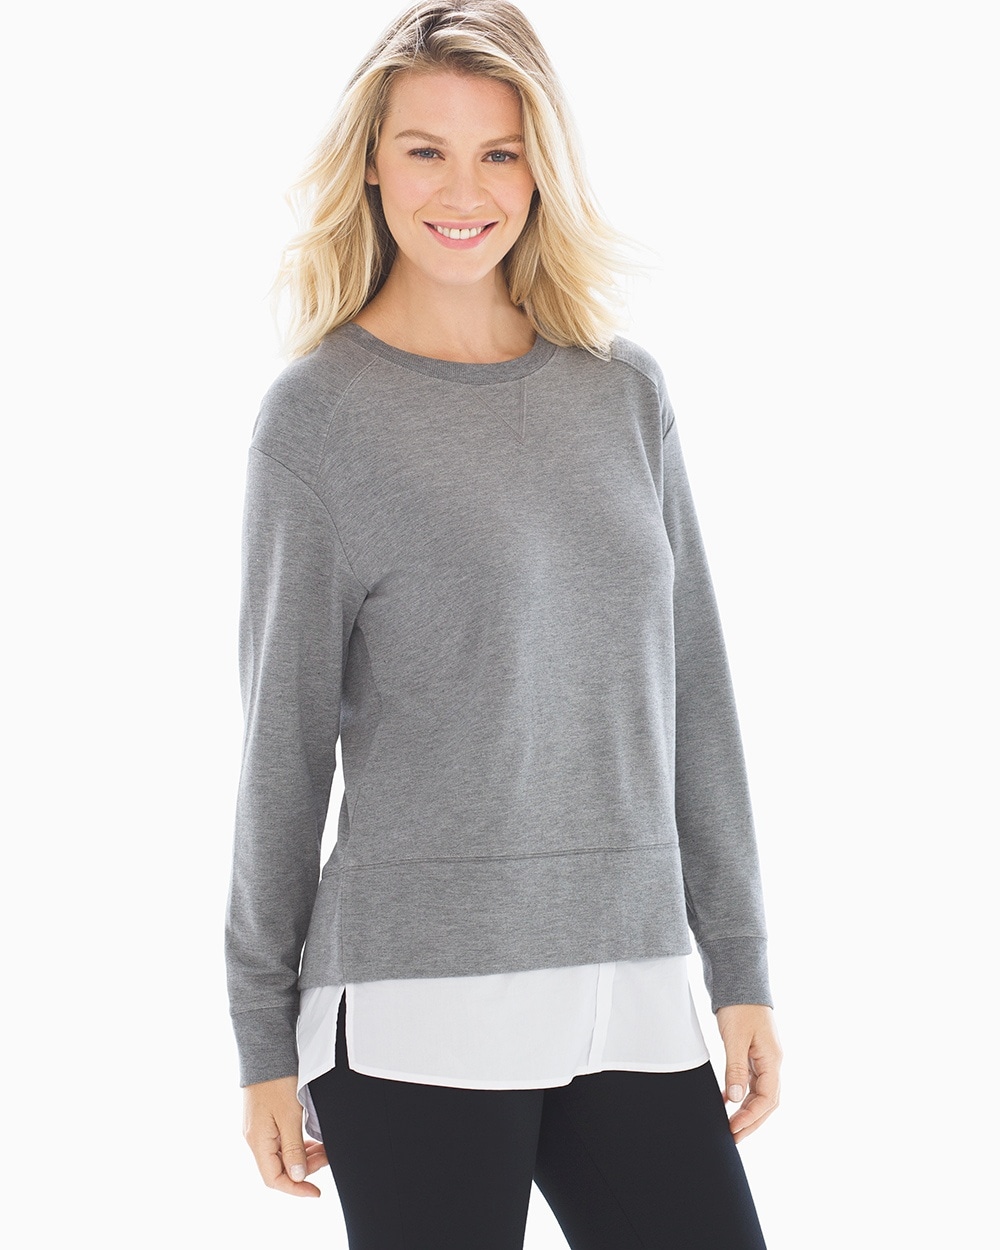 French Terry Modal Layered Look Sweatshirt Heather Graphite